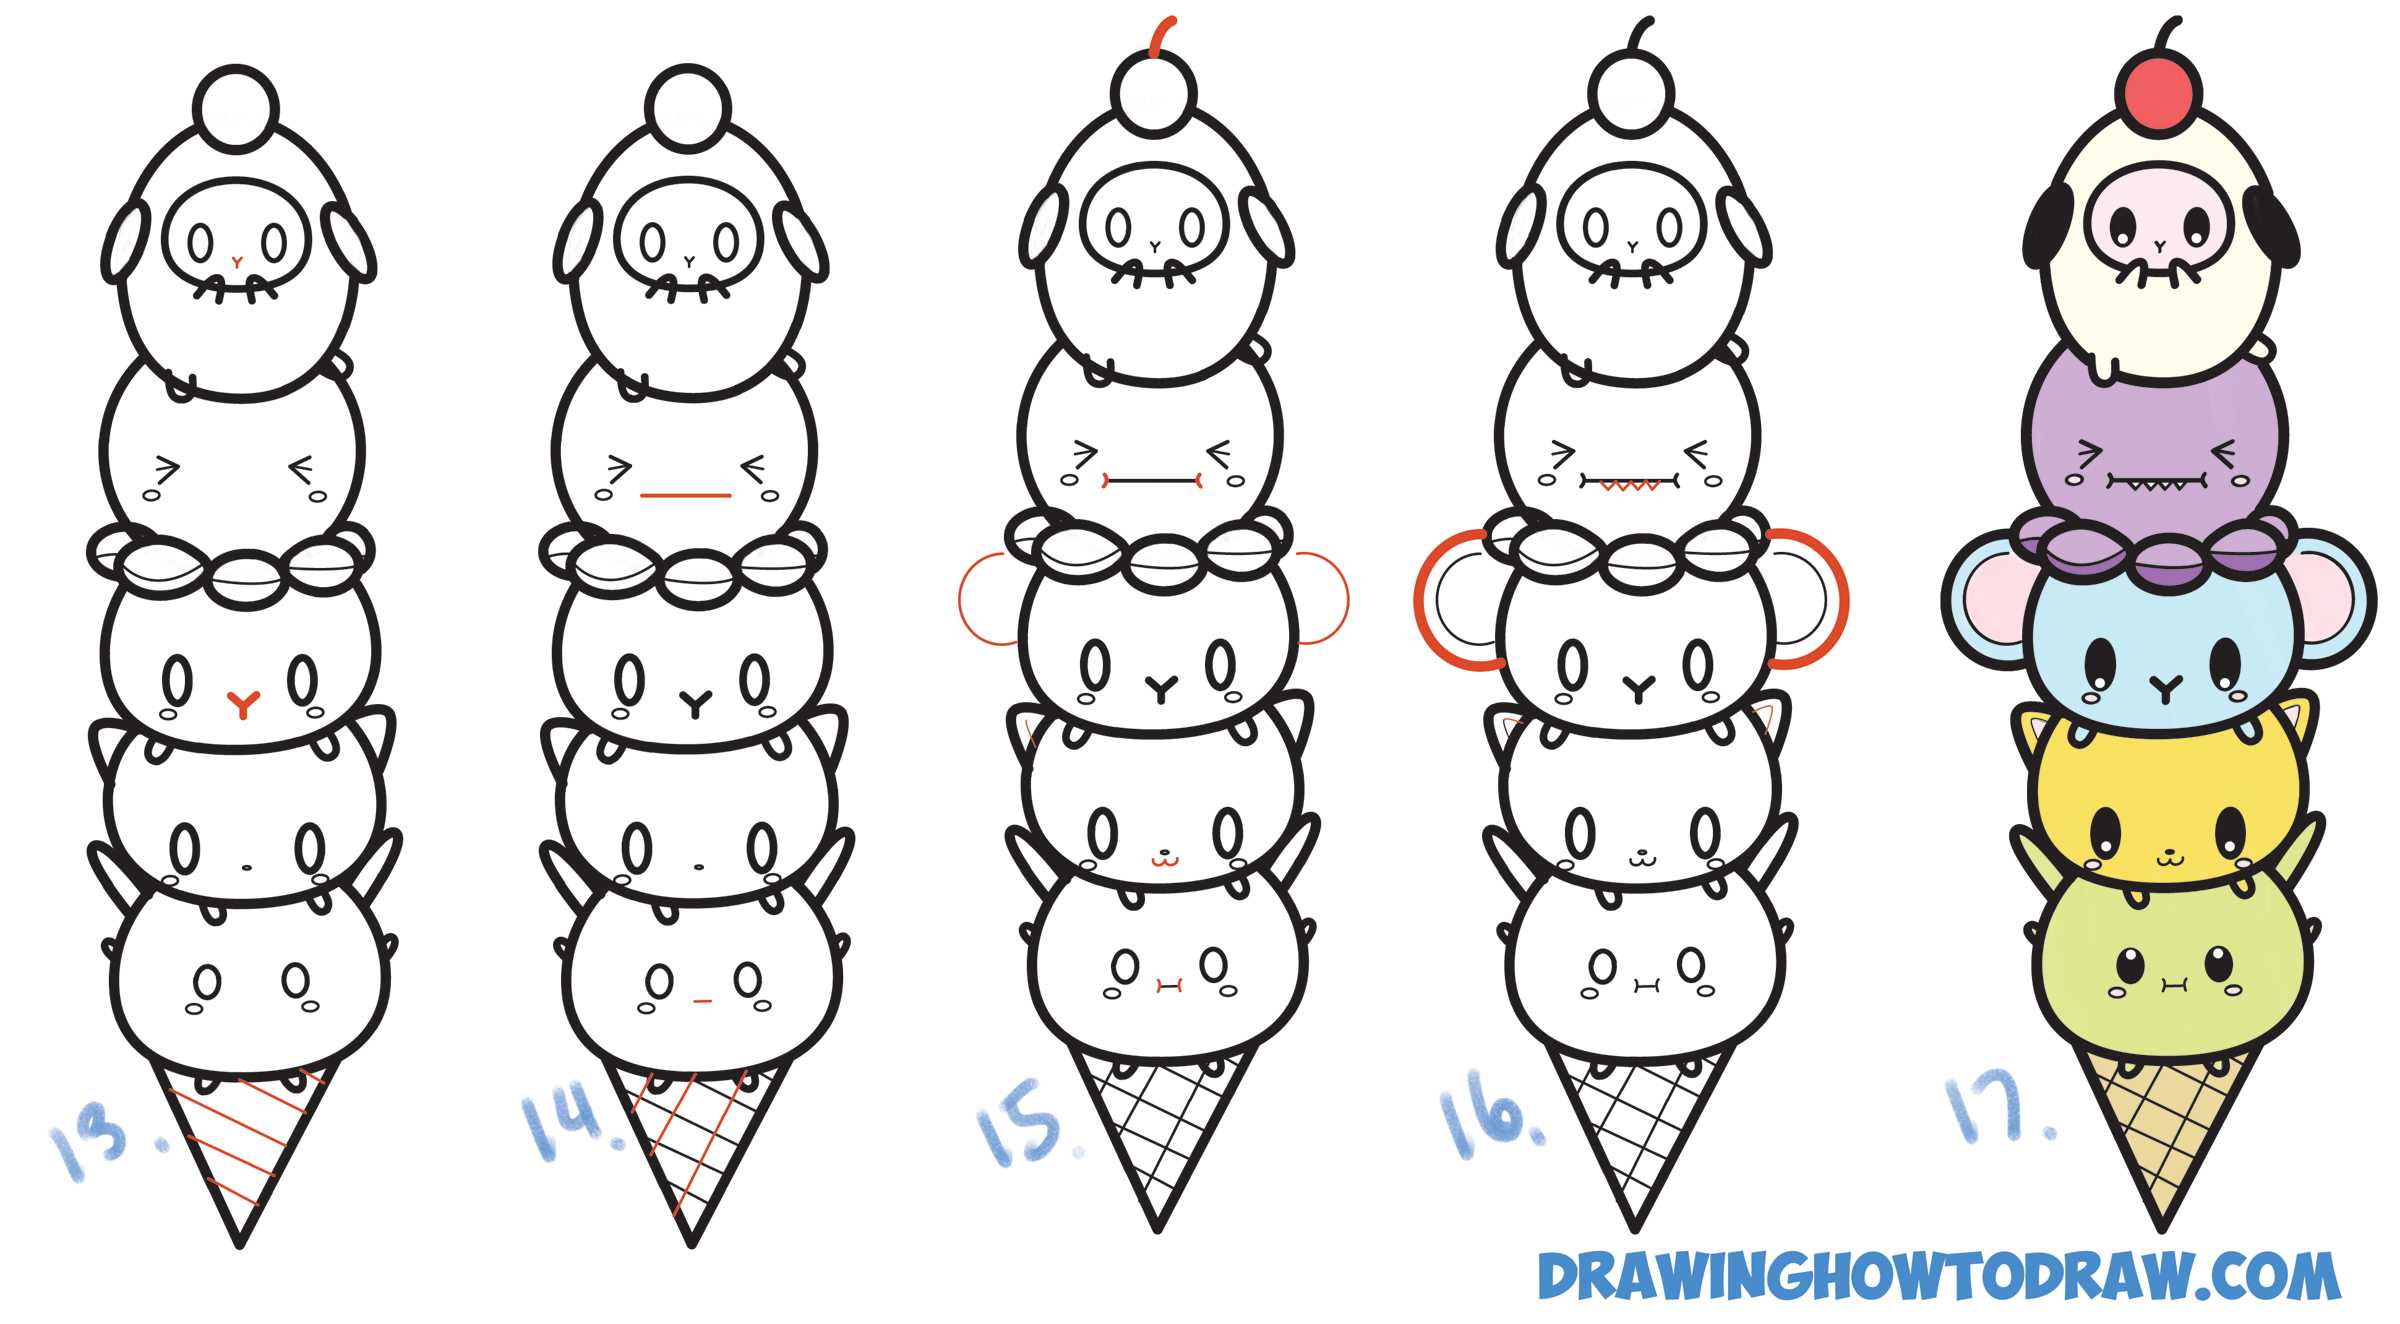 Amazing How To Draw Cute Cartoon Animals Step By Step of all time Learn more here 